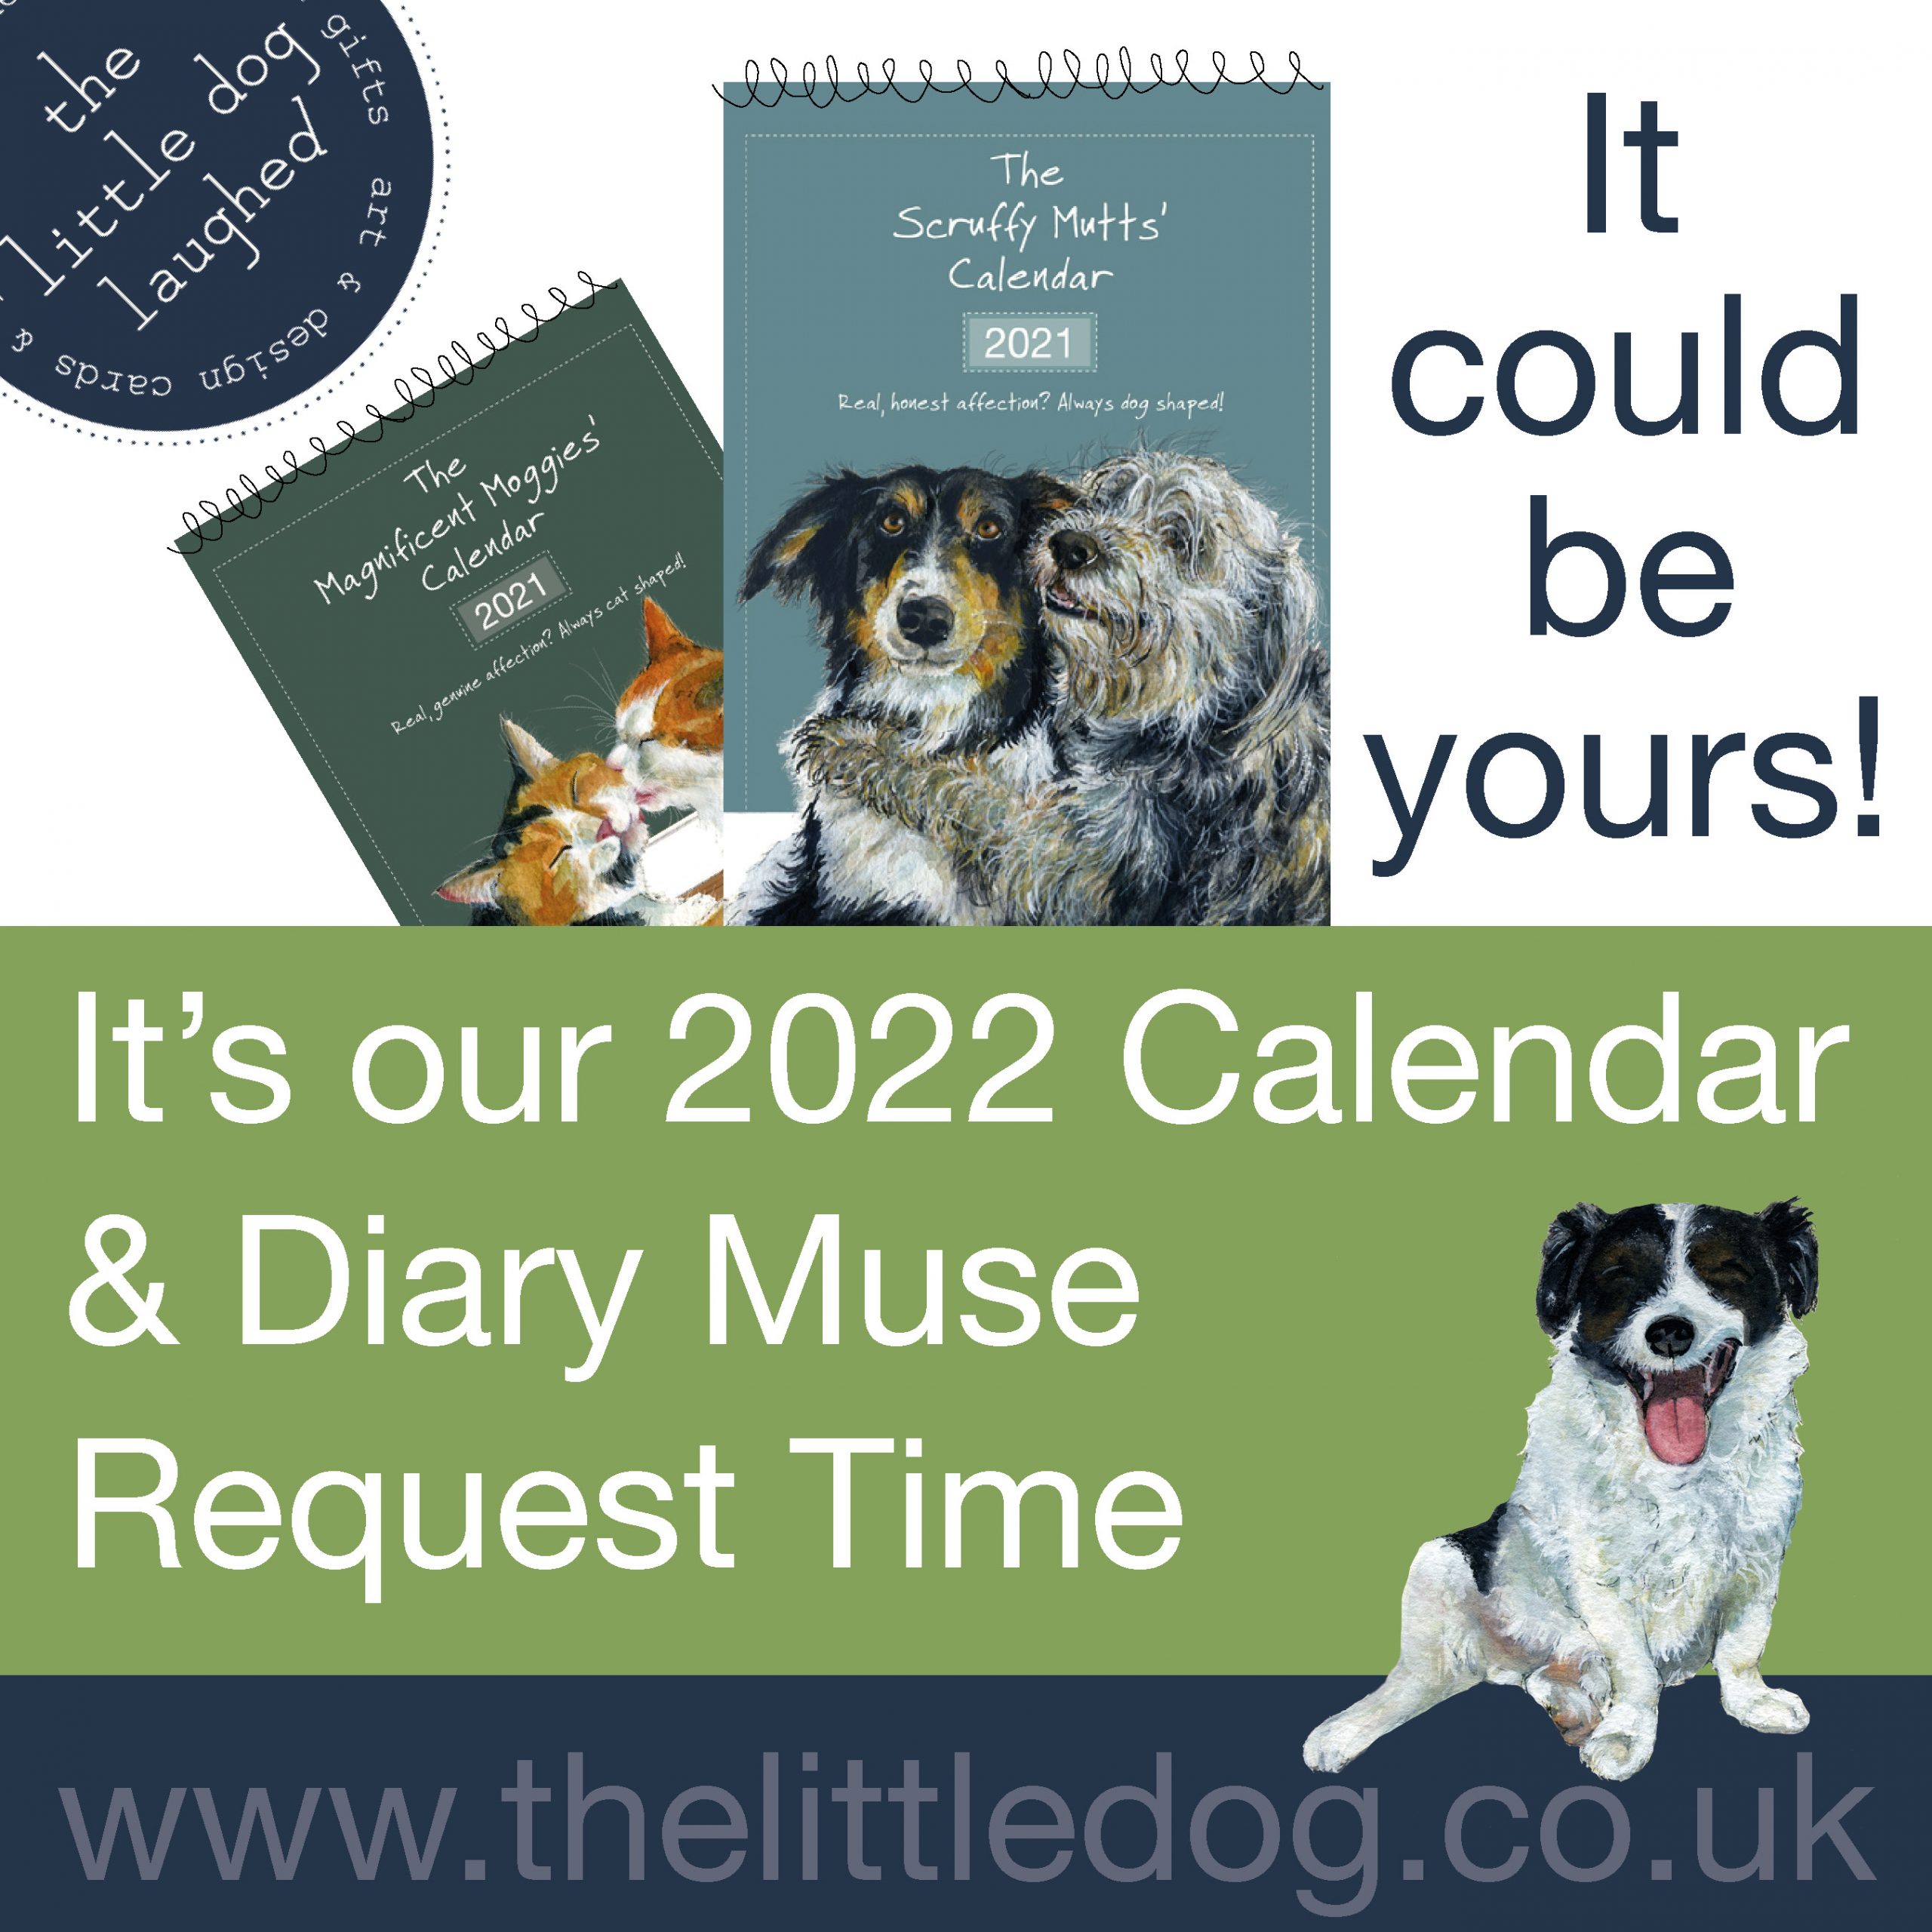 Dog Calendar Contest 2022 2022 Search For A Superstar Calendar & Diary Competition Has Opened Early!  - The Little Dog Laughed